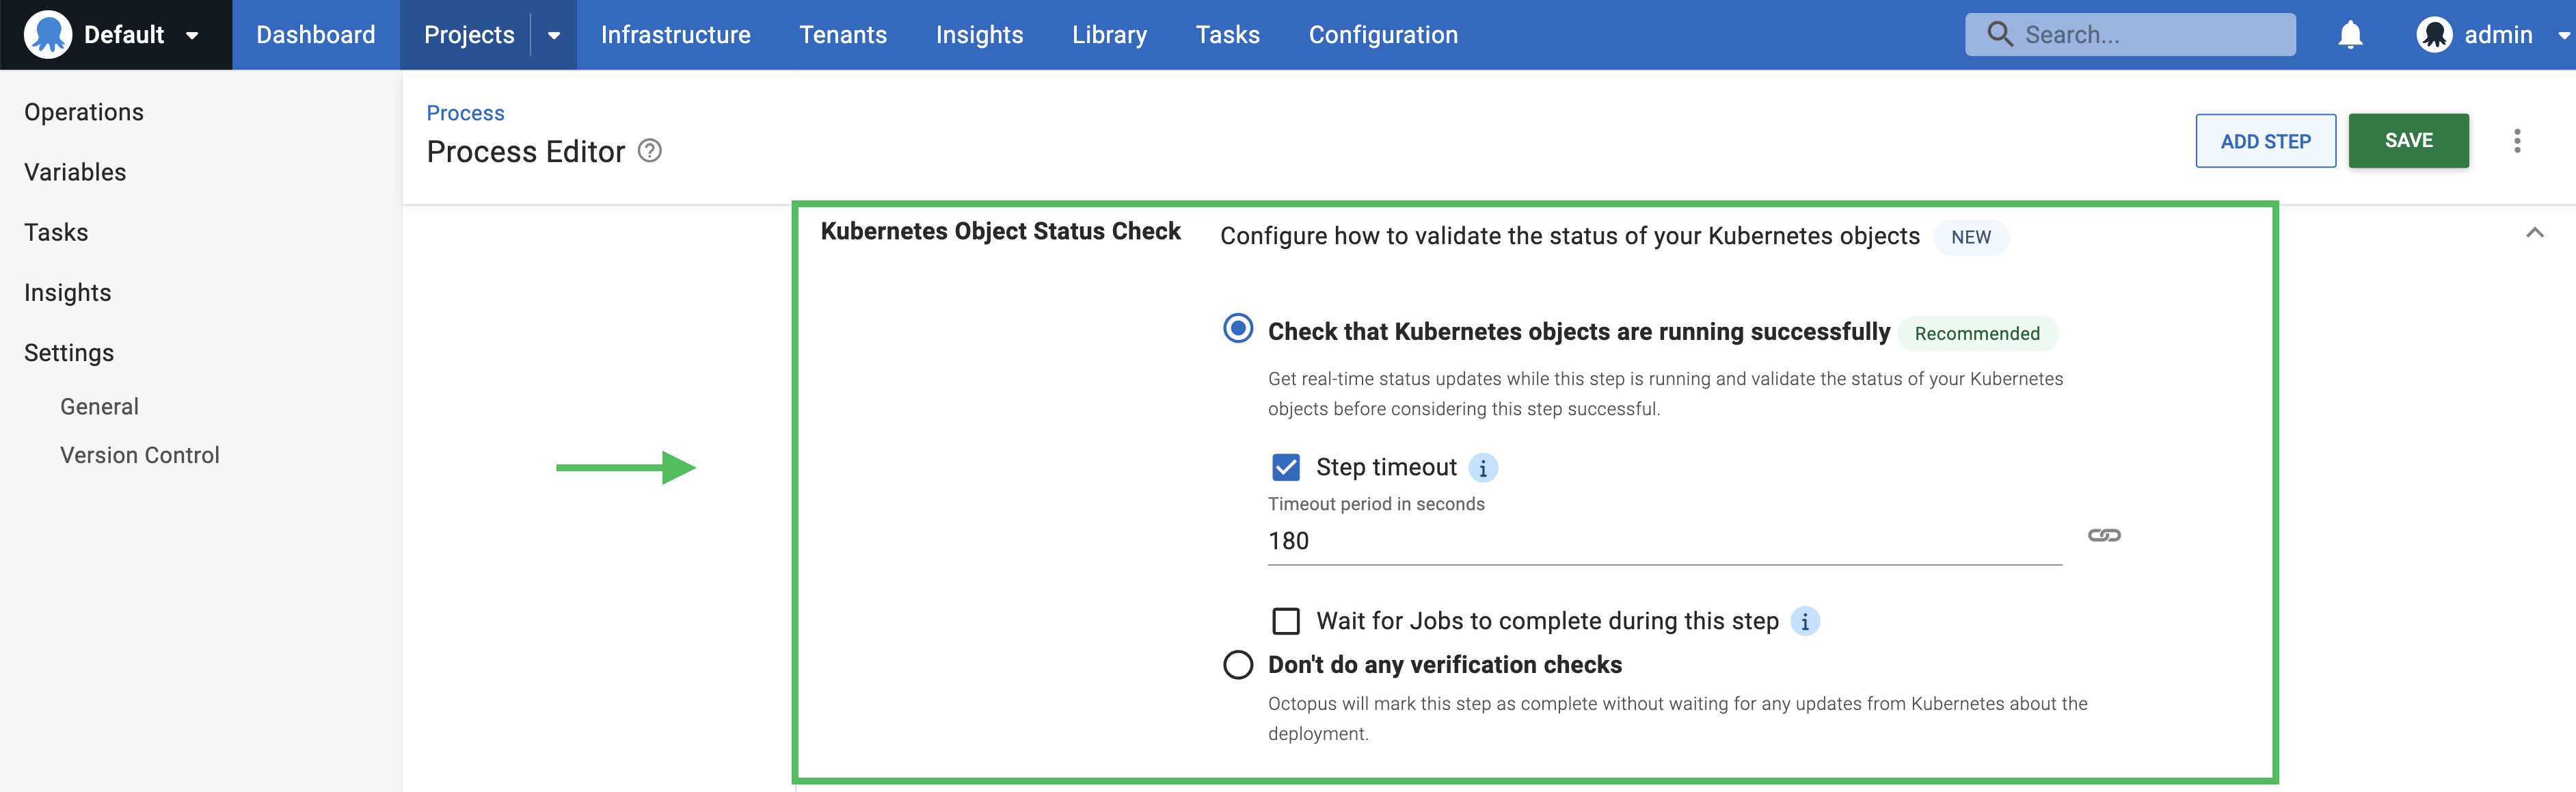 A screenshot of the Kubernetes Object Status configuration section